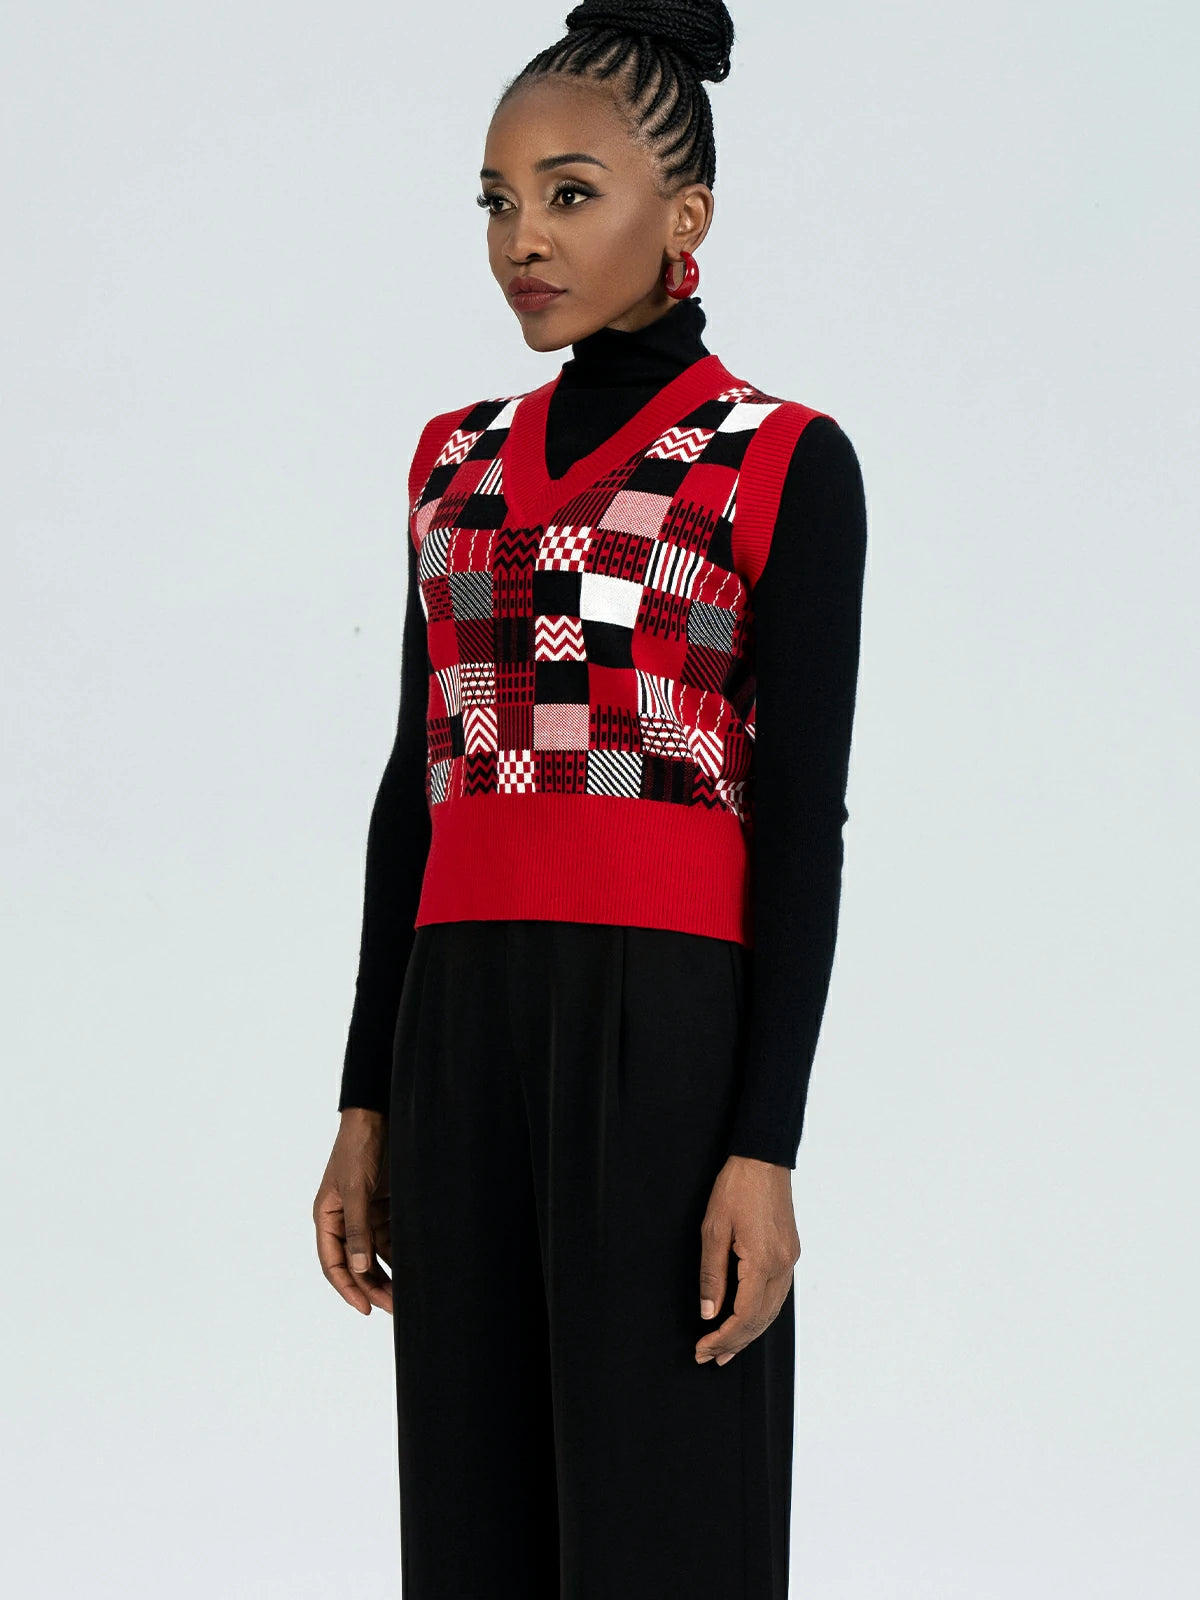 Stylish loose-knit Christmas vest with individual checkered squares